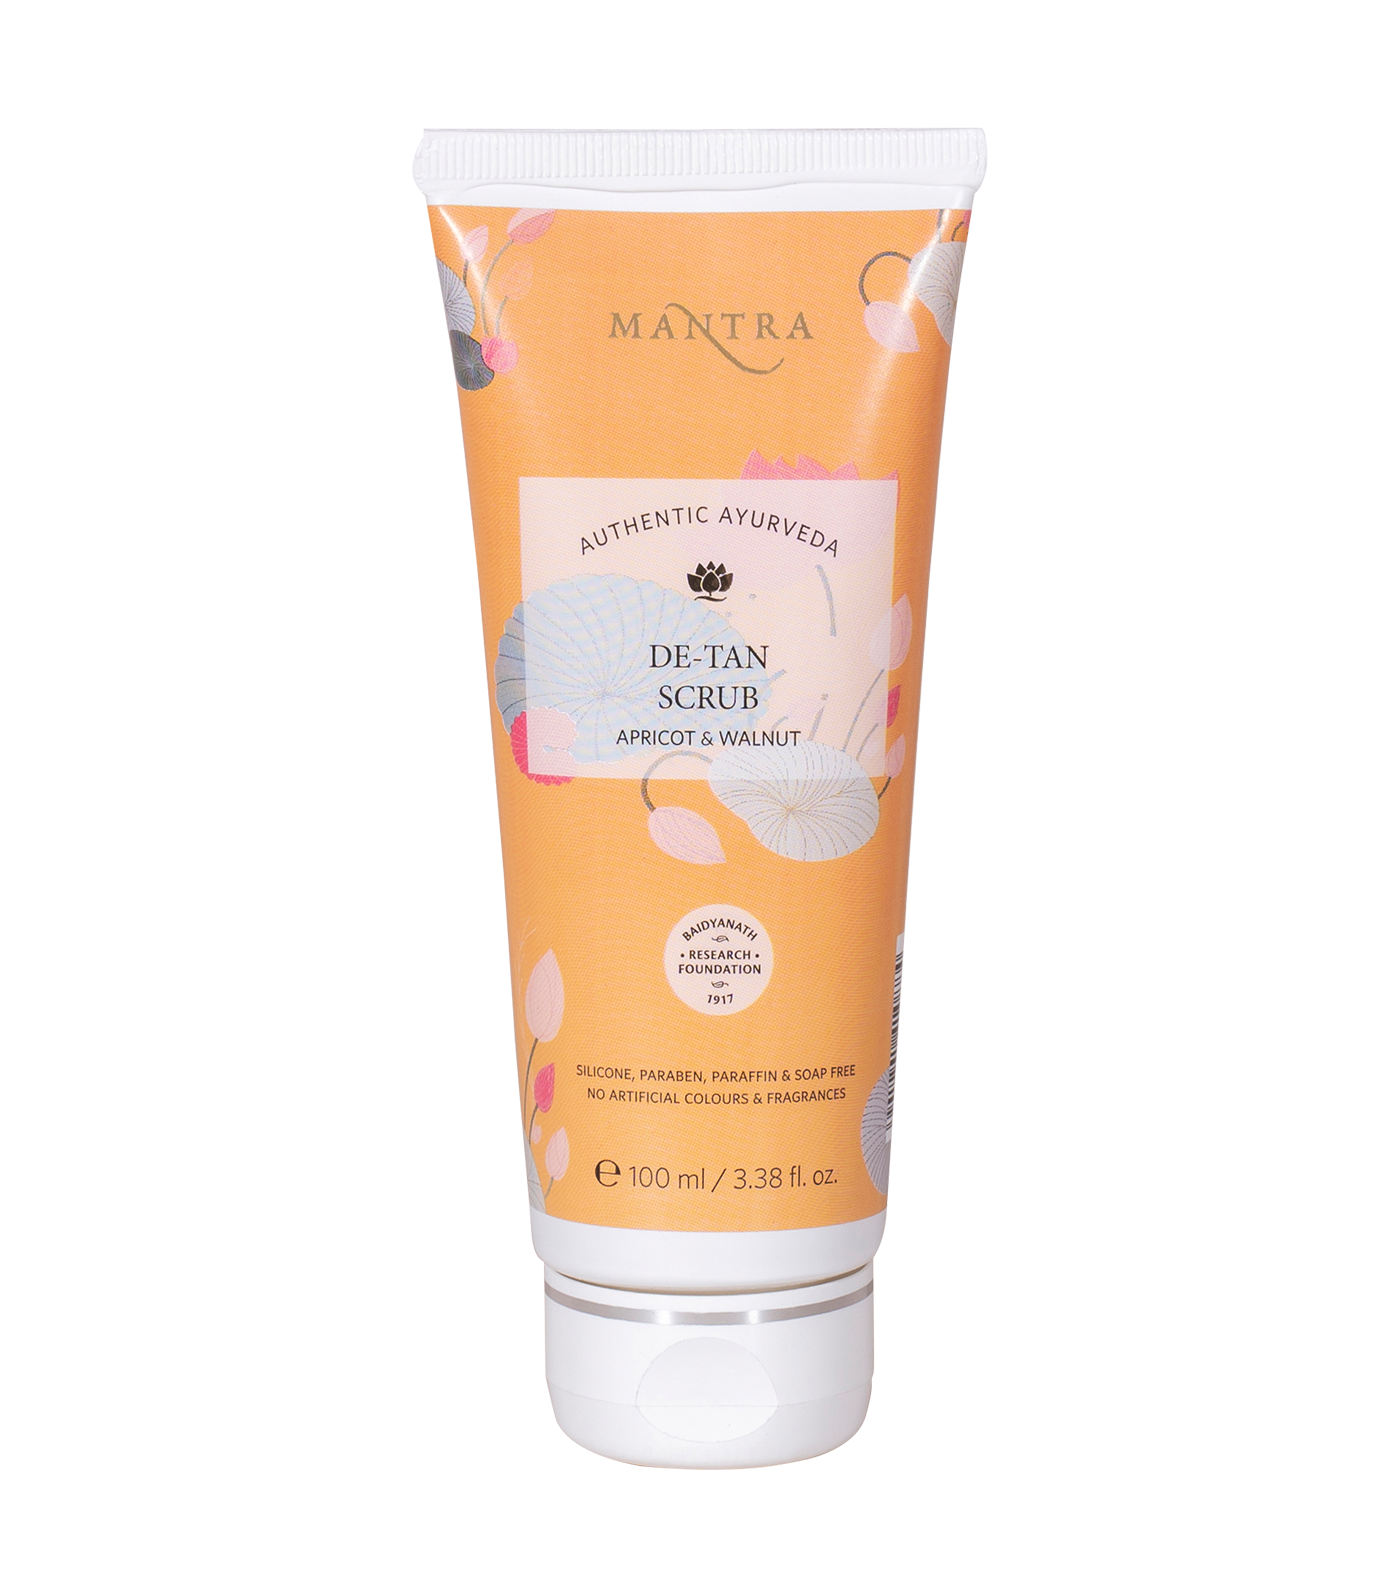 Mantra De-Tan Scrub Apricot & Walnut 100ml, Reduces Pigmentation & Blackheads, Retain Moisture, Eliminates Patches of Dry Skin & Relieves Skin Inflammation Revealing Fresher, Lighter & Younger Skin